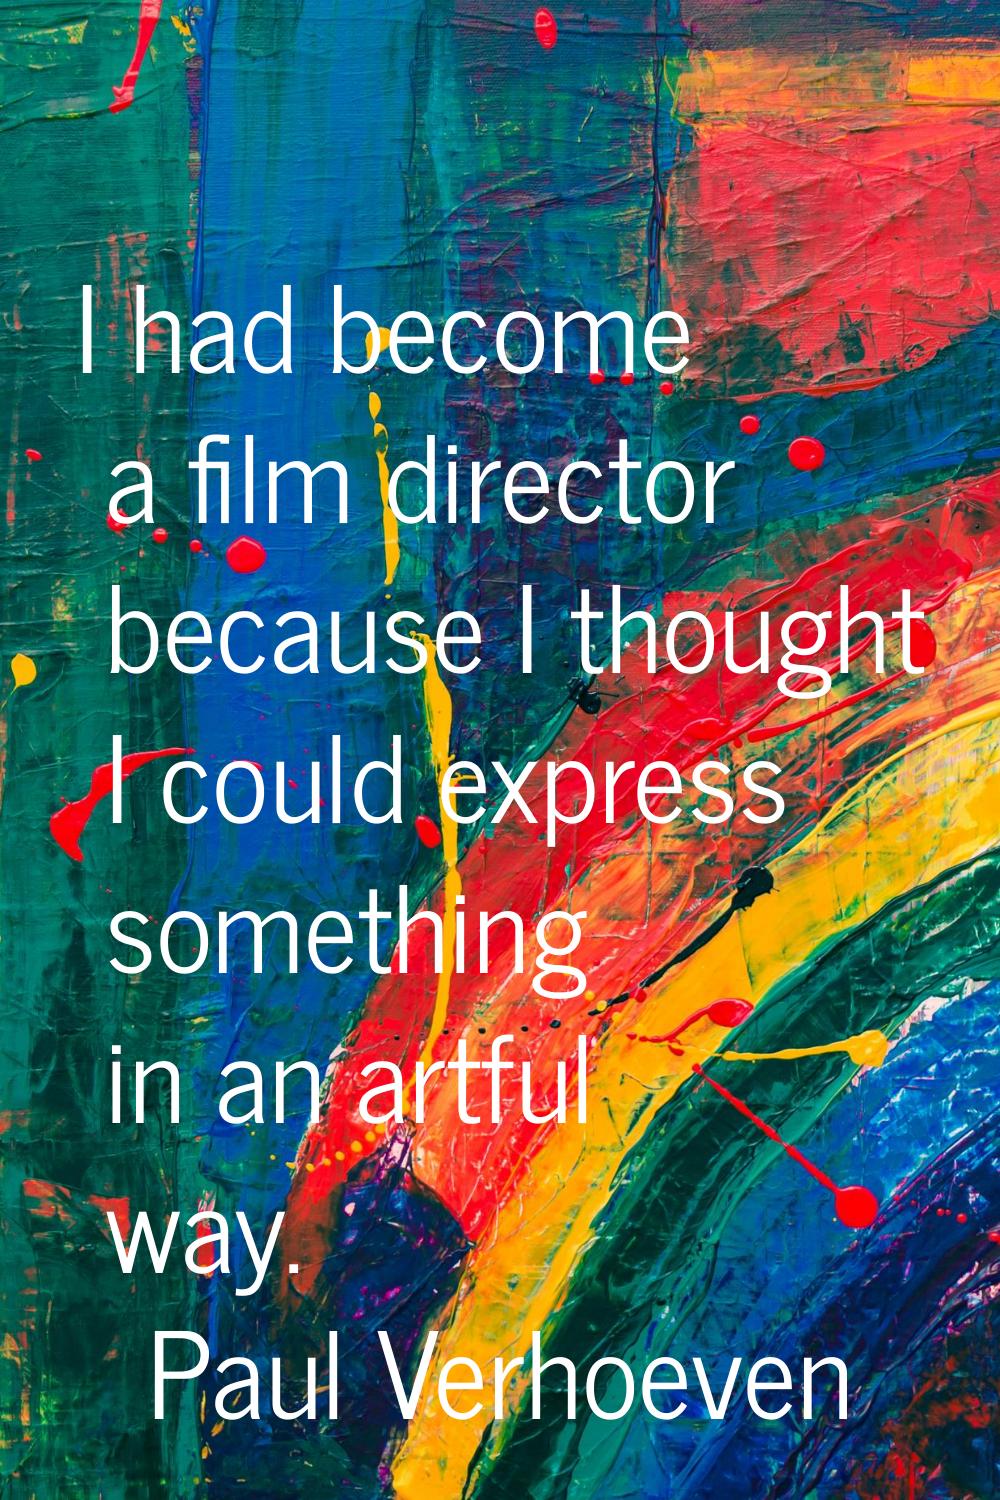 I had become a film director because I thought I could express something in an artful way.